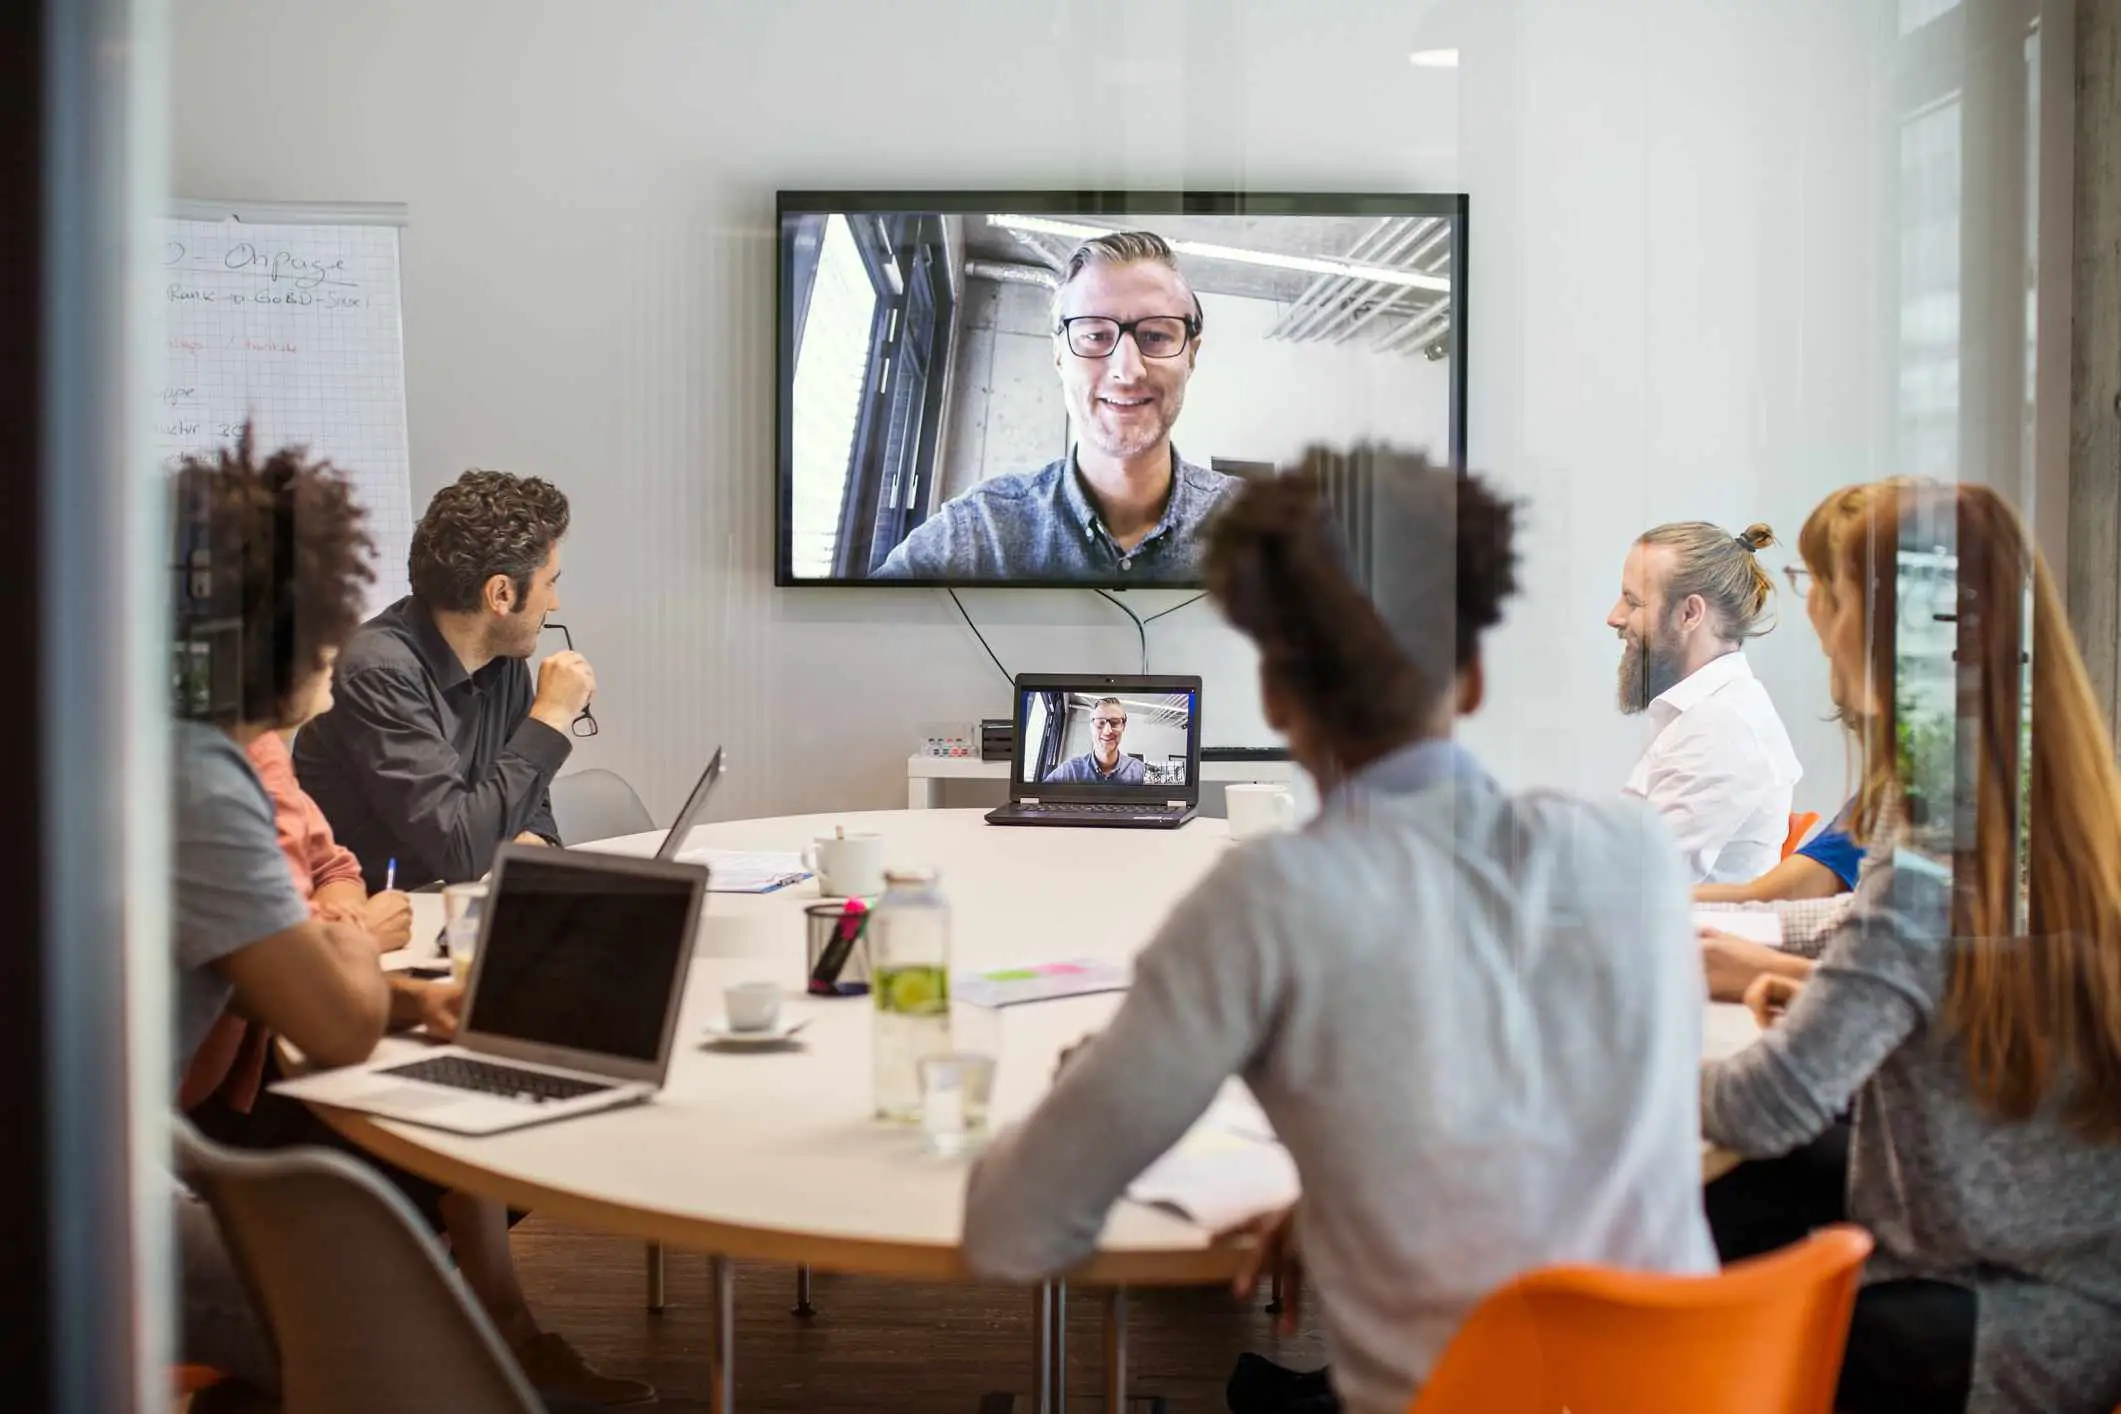 How to Use Zoom: The 12 Best Tips for Successful Video Conferencing ...